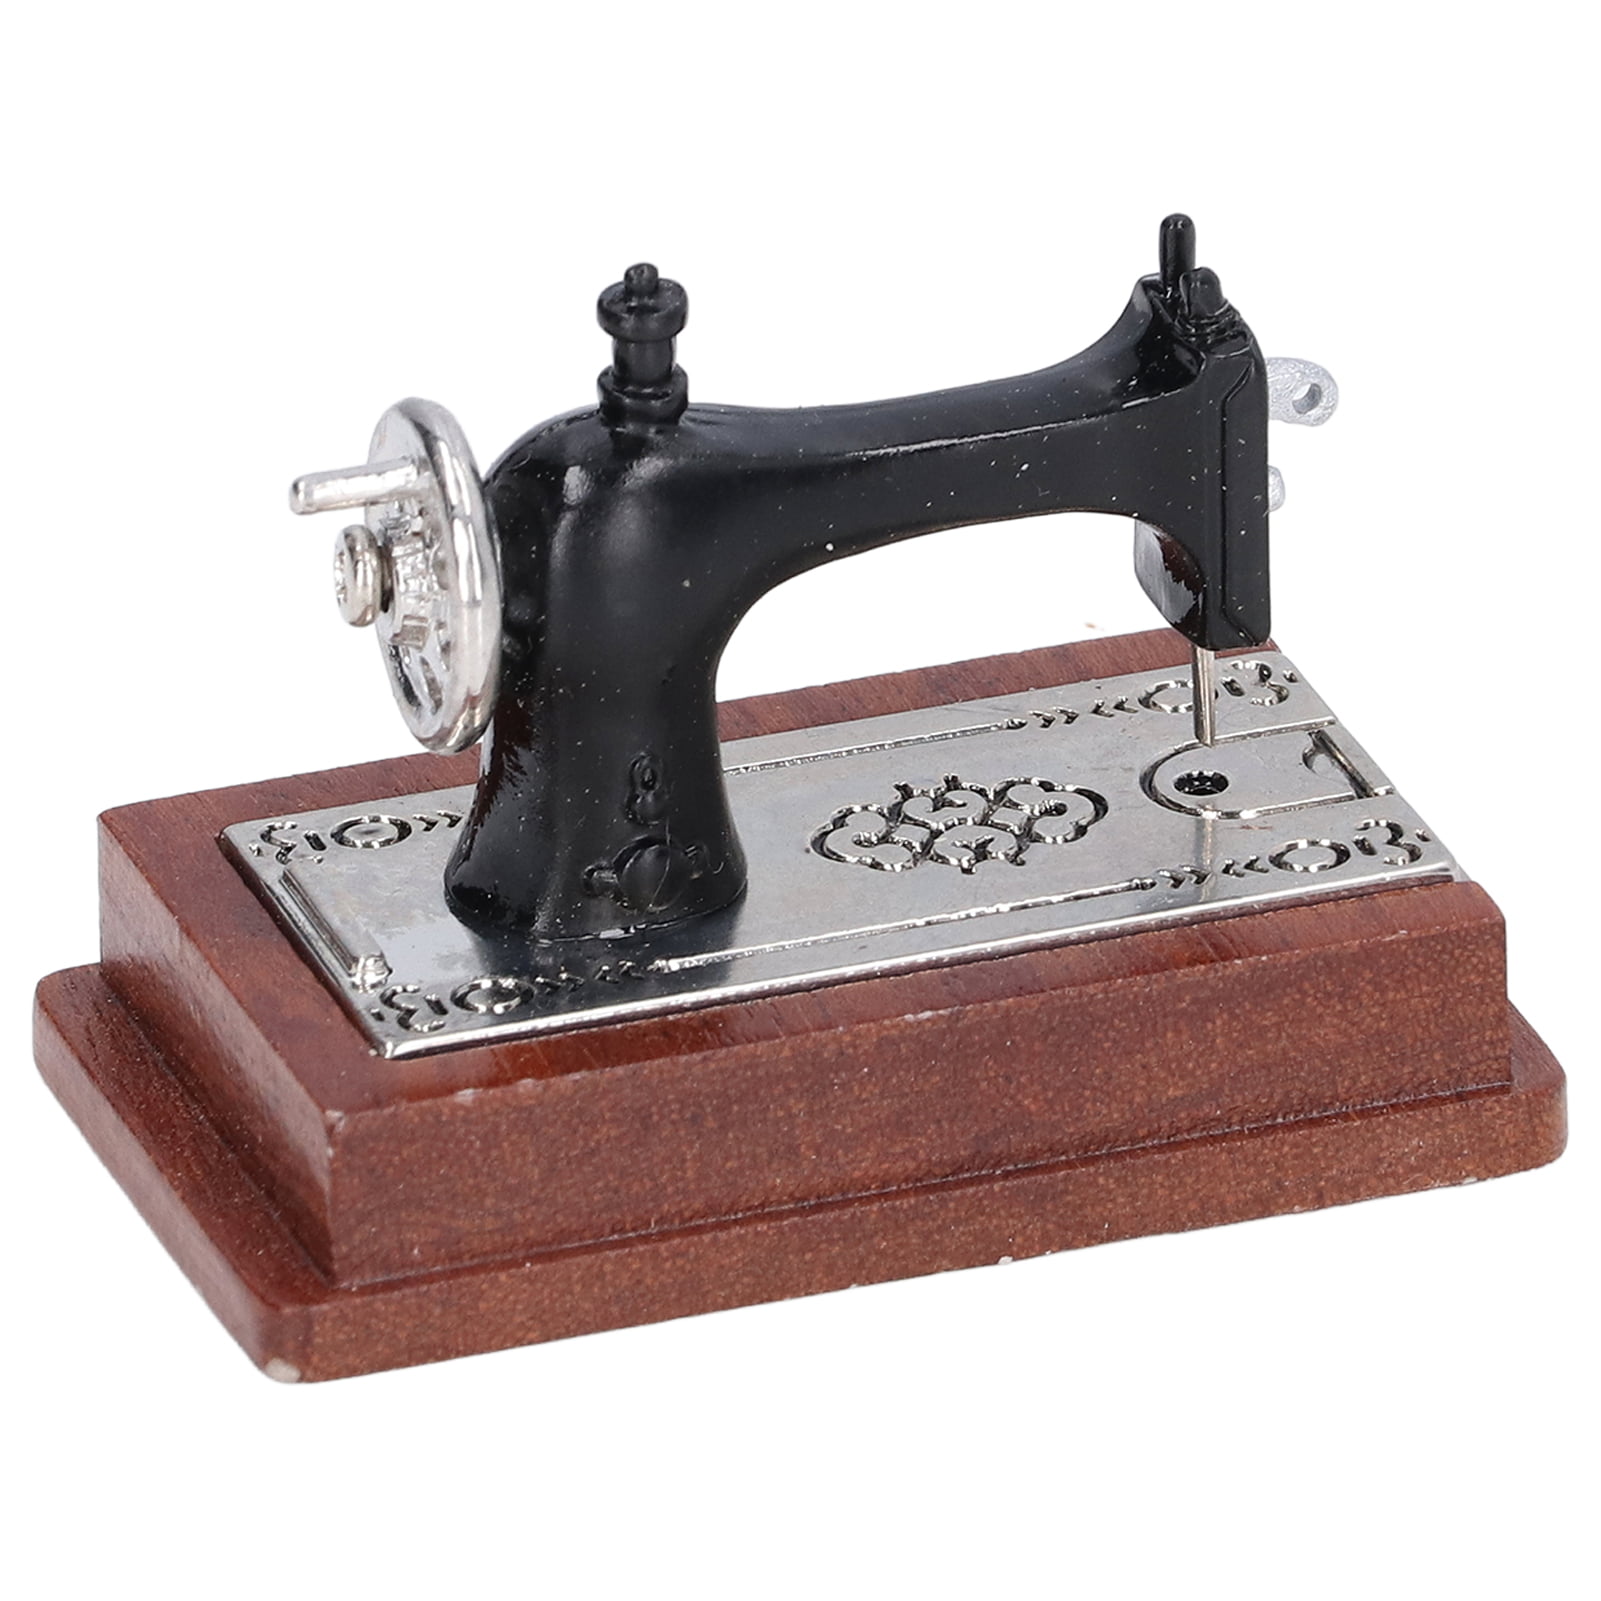 12 Miniature Dollhouse Scene Model Accessories Vintage Sewing Machine Simulation Sewing Box for 1 Pack of 2 1：6 Scale 